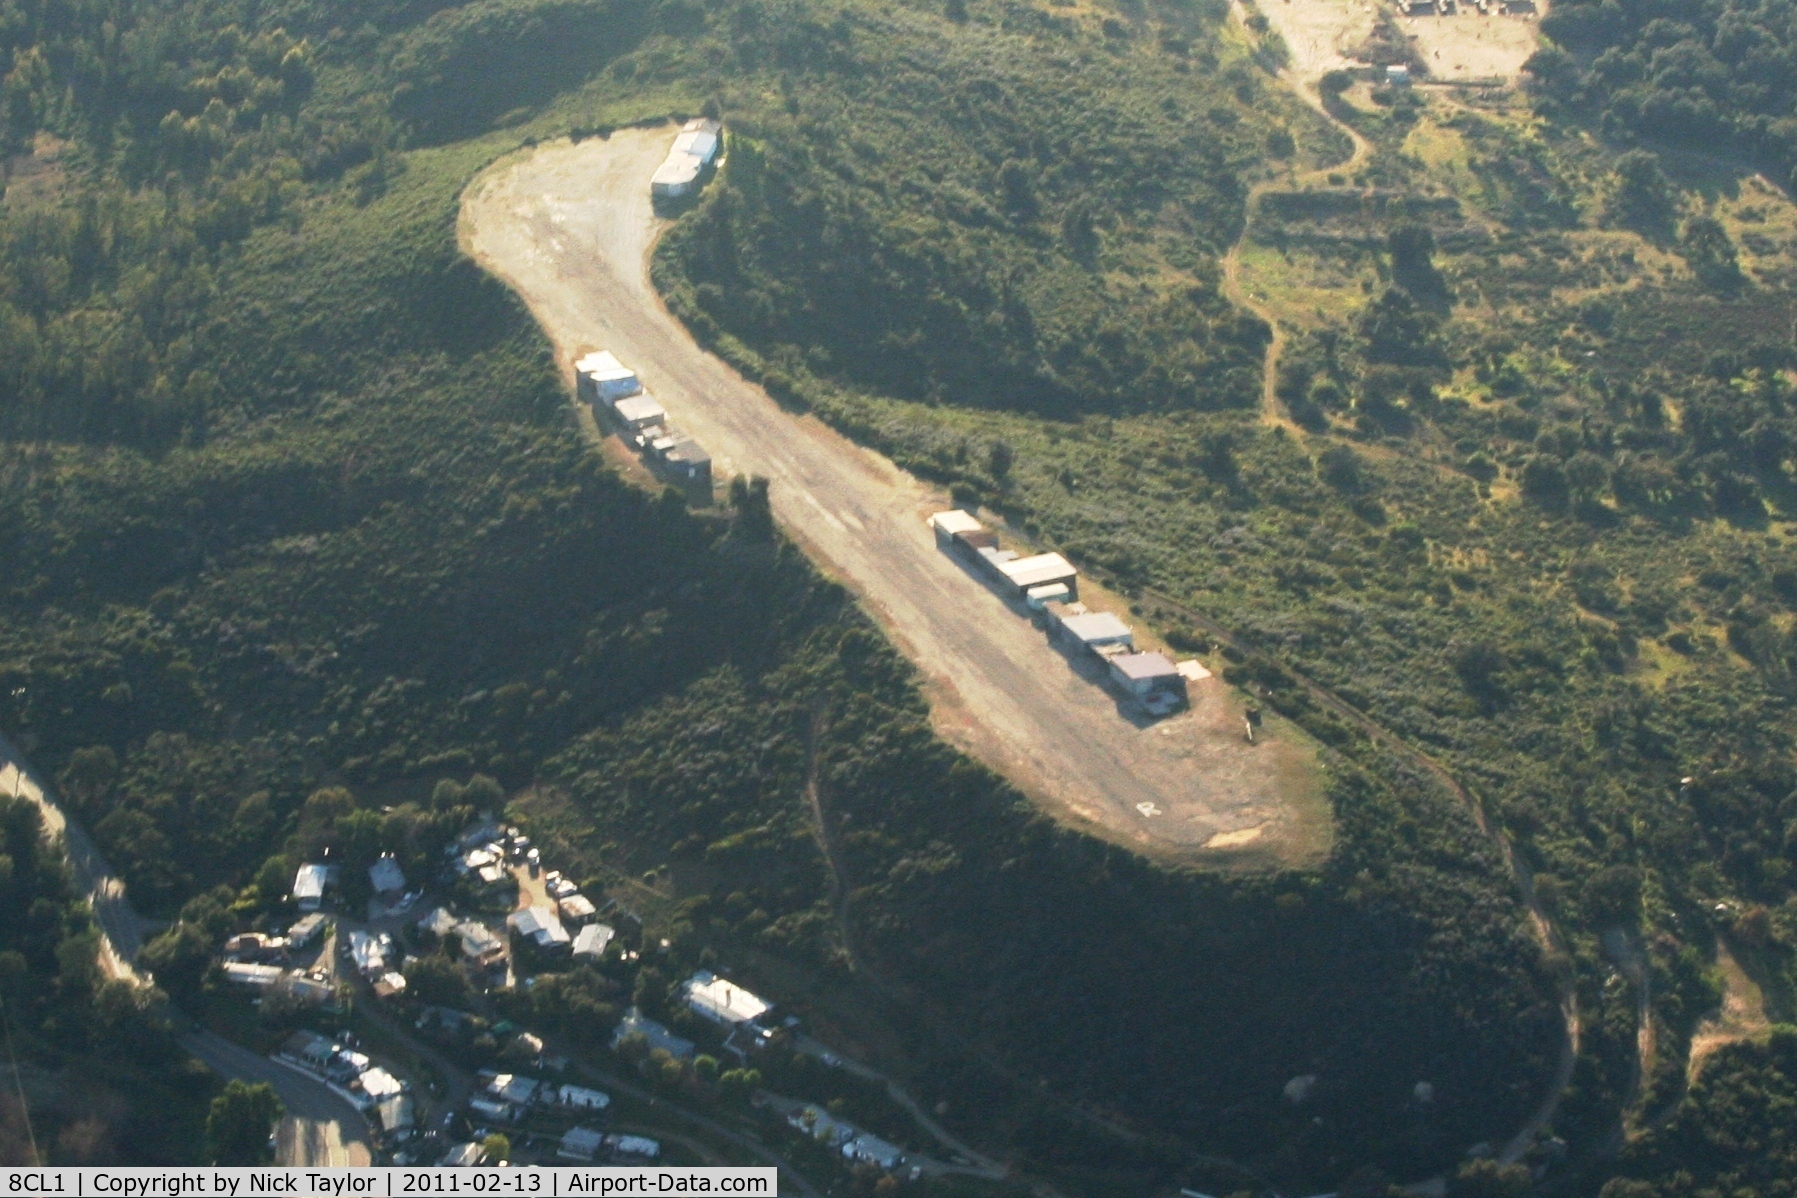 Lake Wohlford Resort Airport (8CL1) - Lake Wohlford private strip